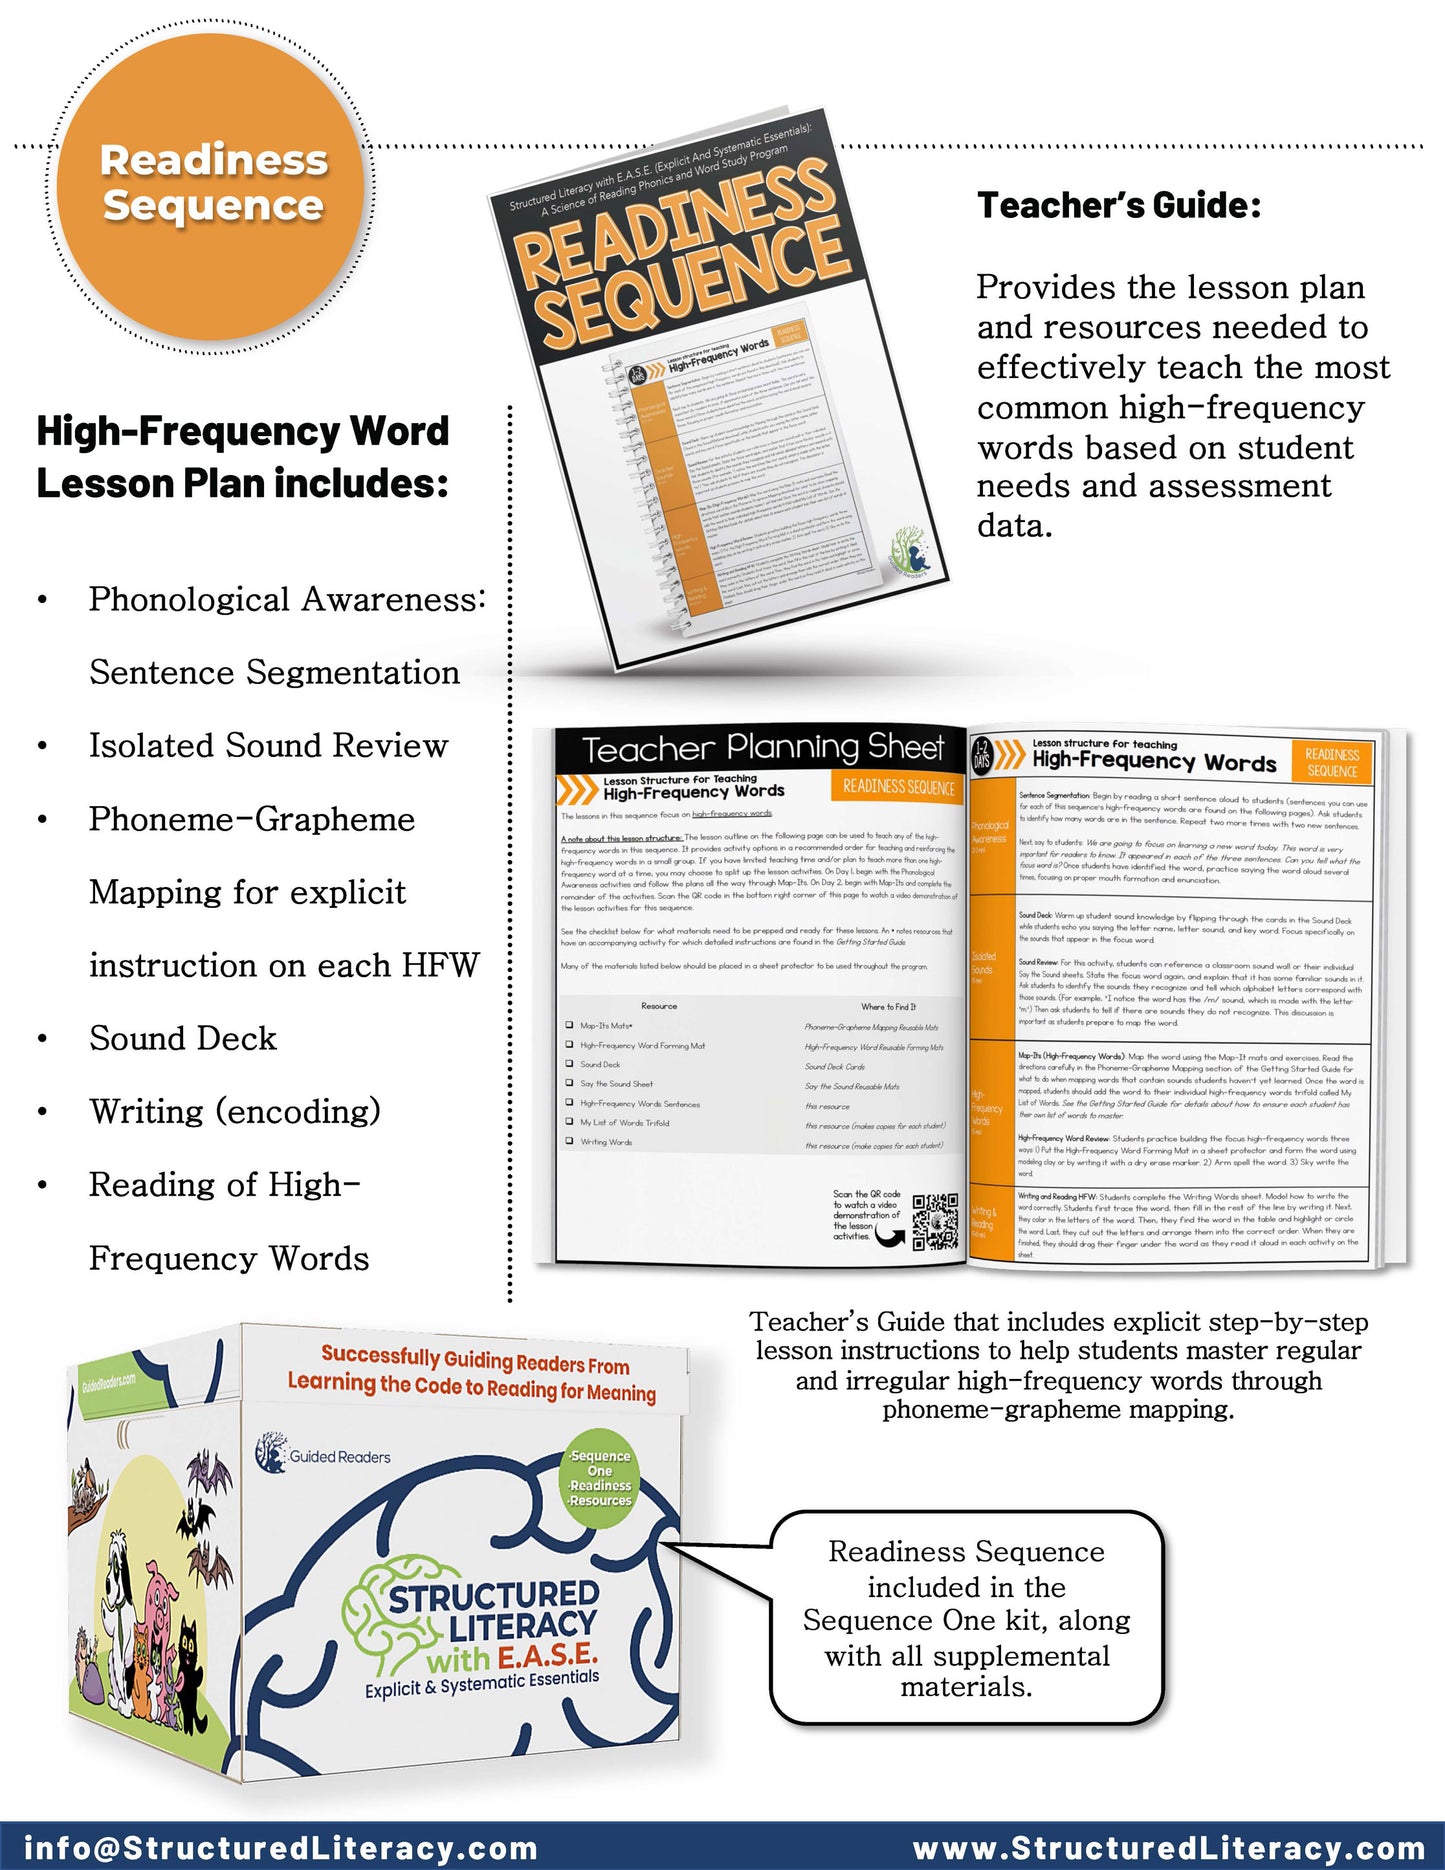 Structured Literacy with E.A.S.E | Complete Kit